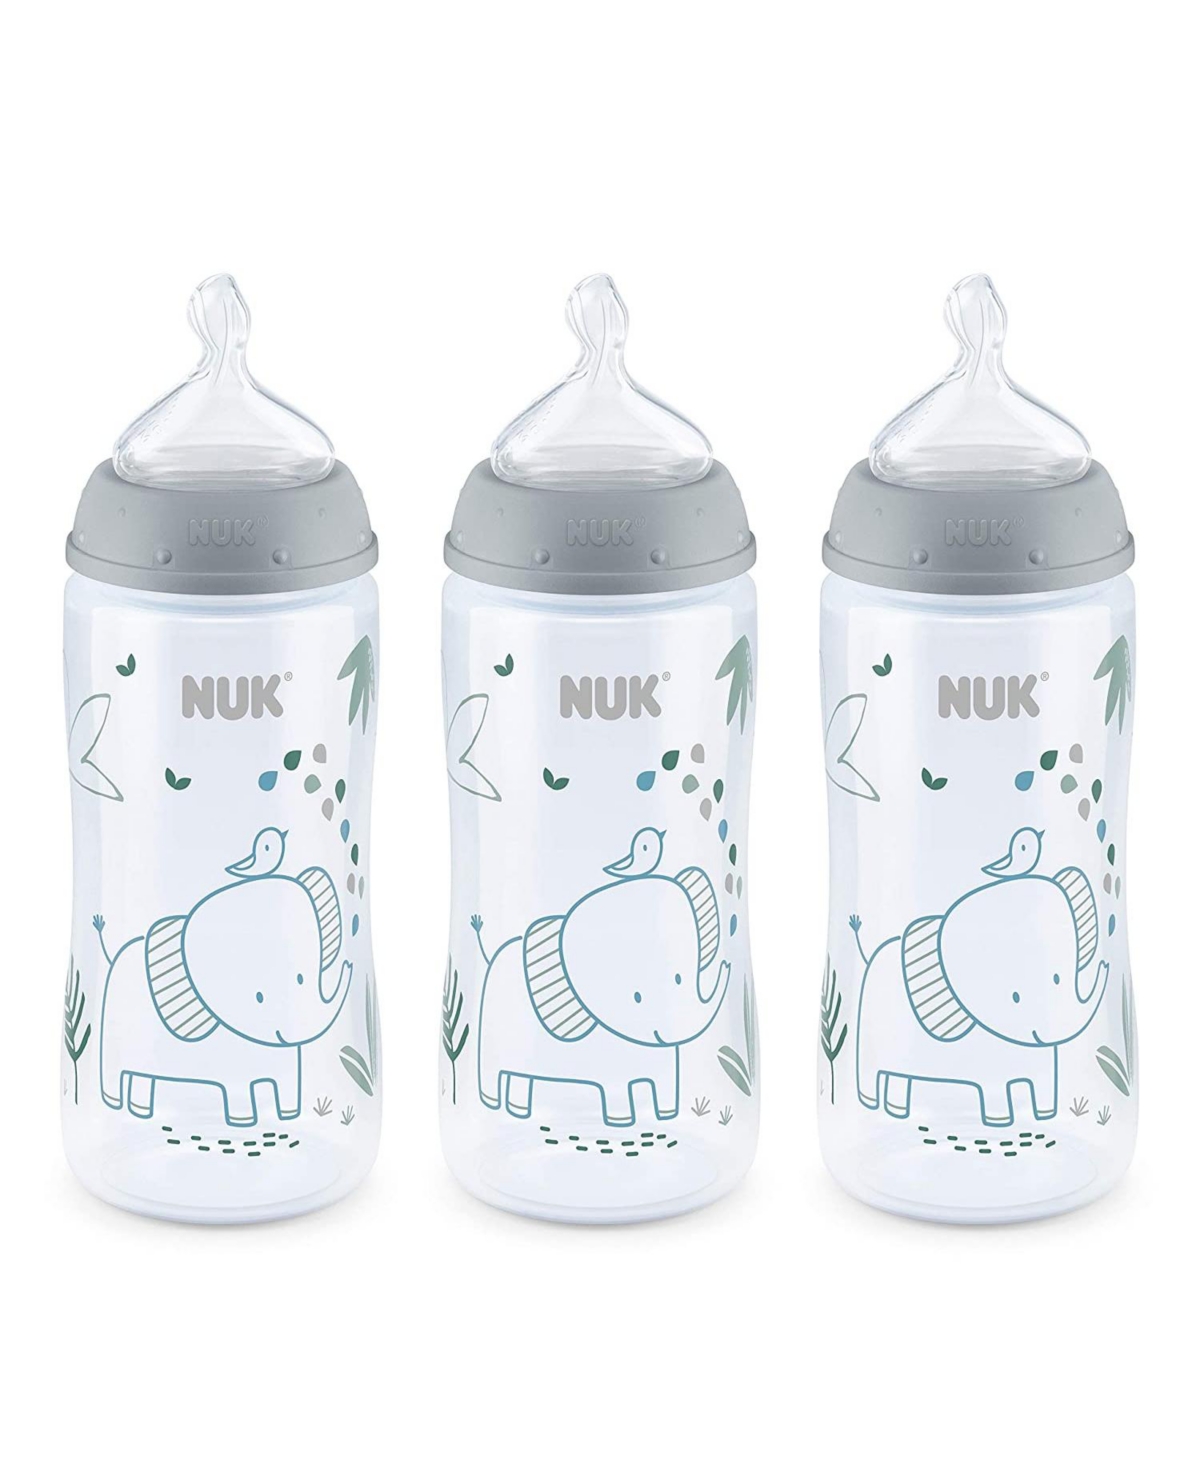 Nuk Smooth Flow Anti Colic Baby Bottle, 10 Oz, 3 Pack, Elephant In Grey